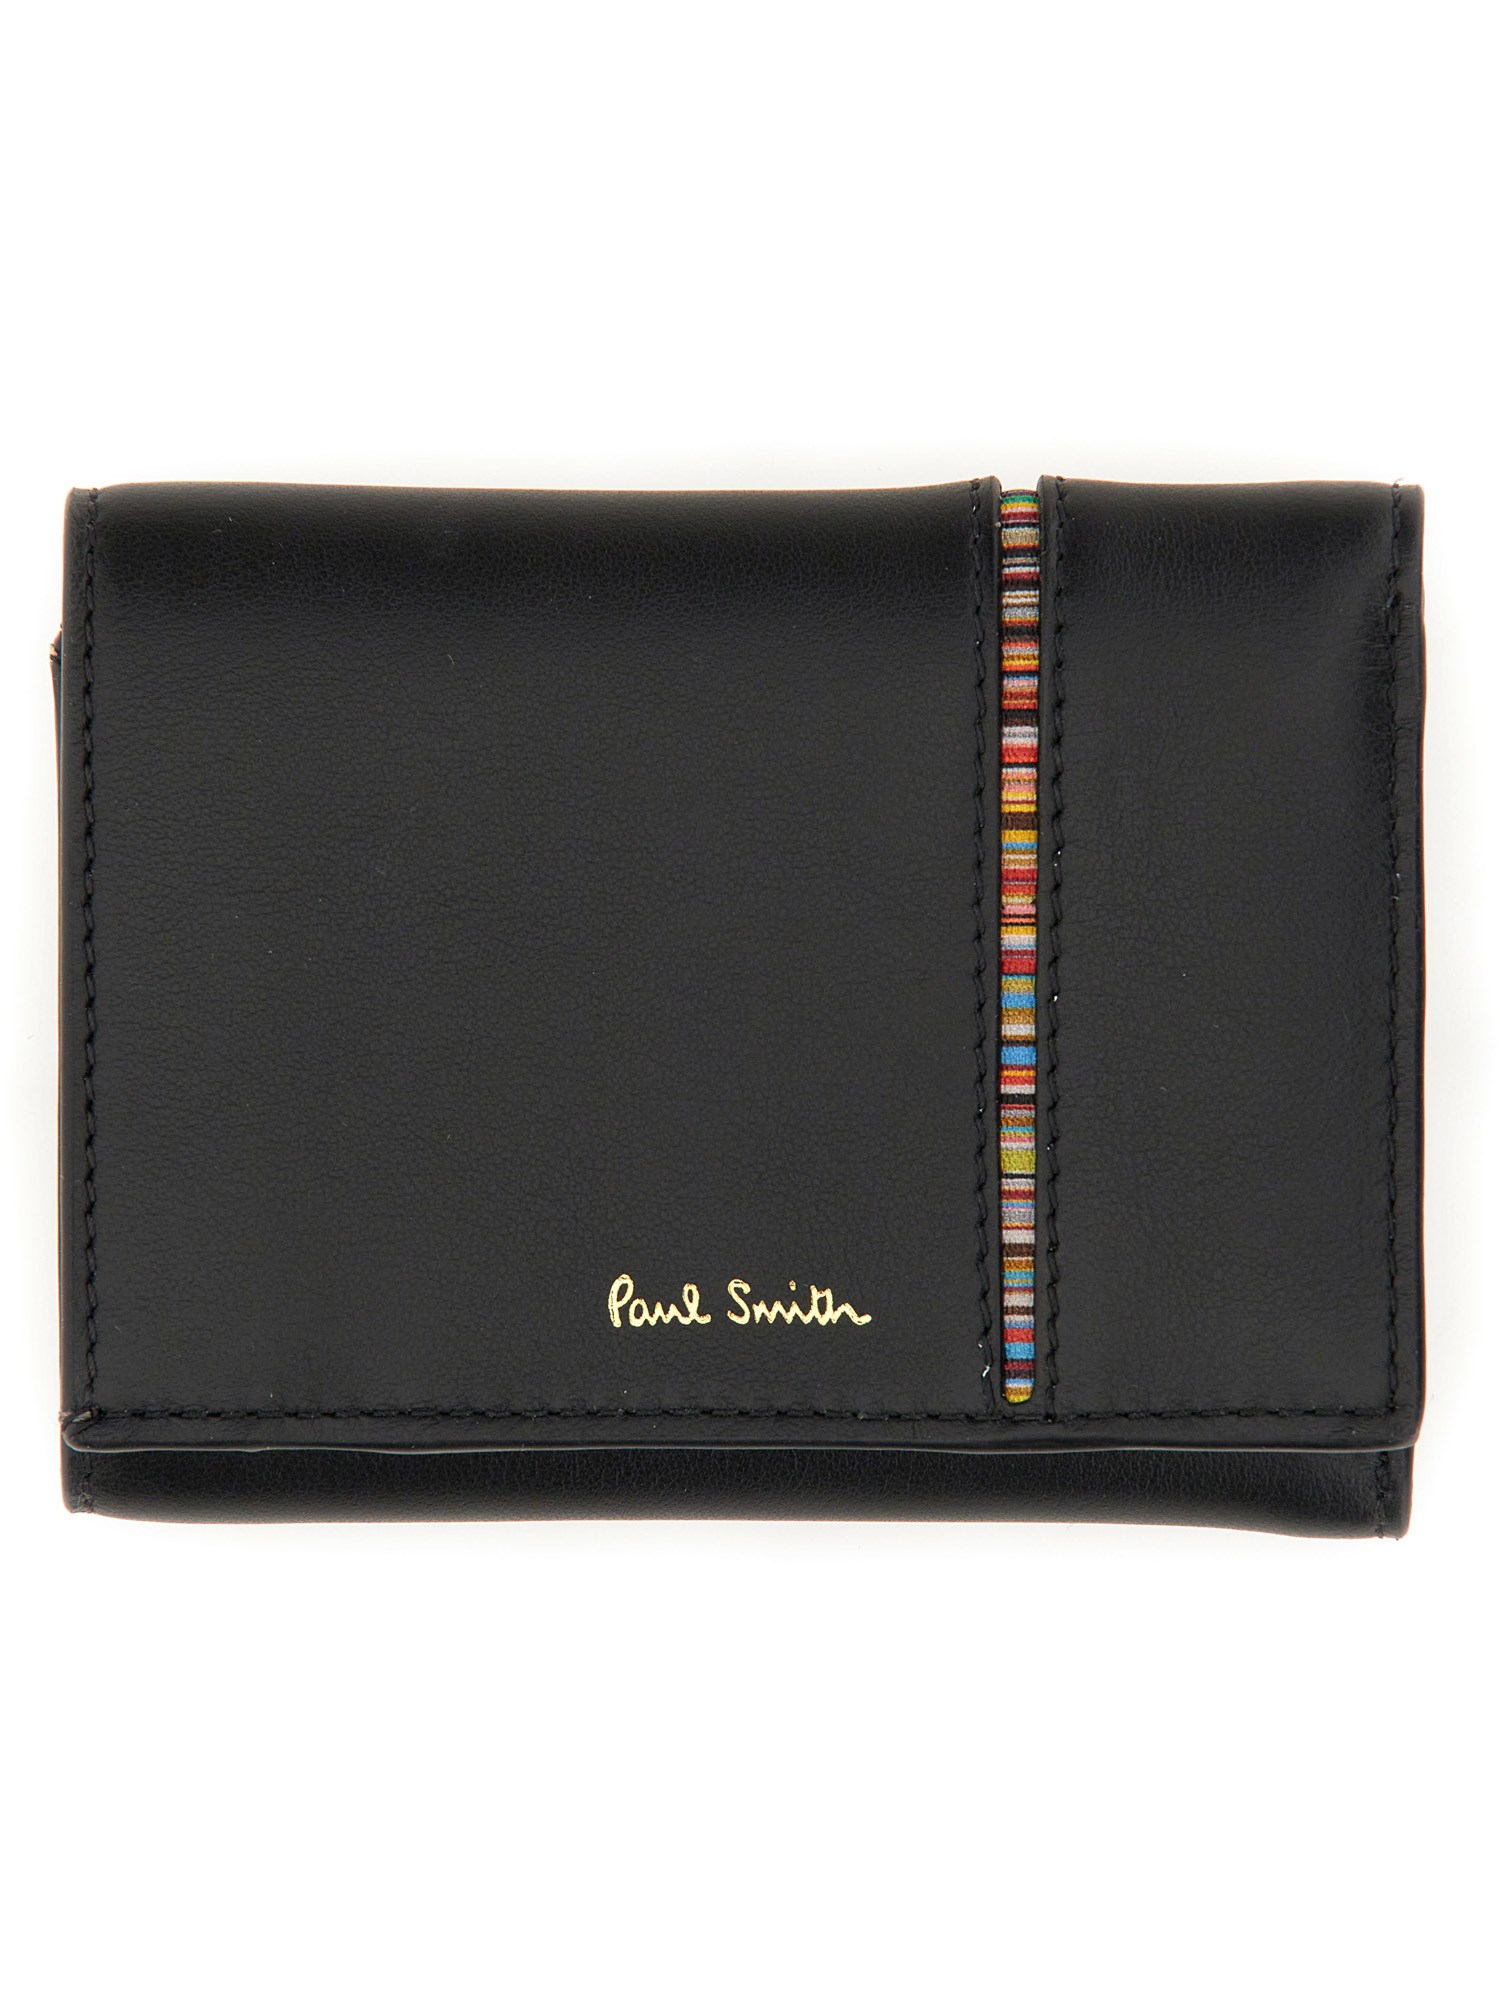 paul smith tri-fold leather wallet